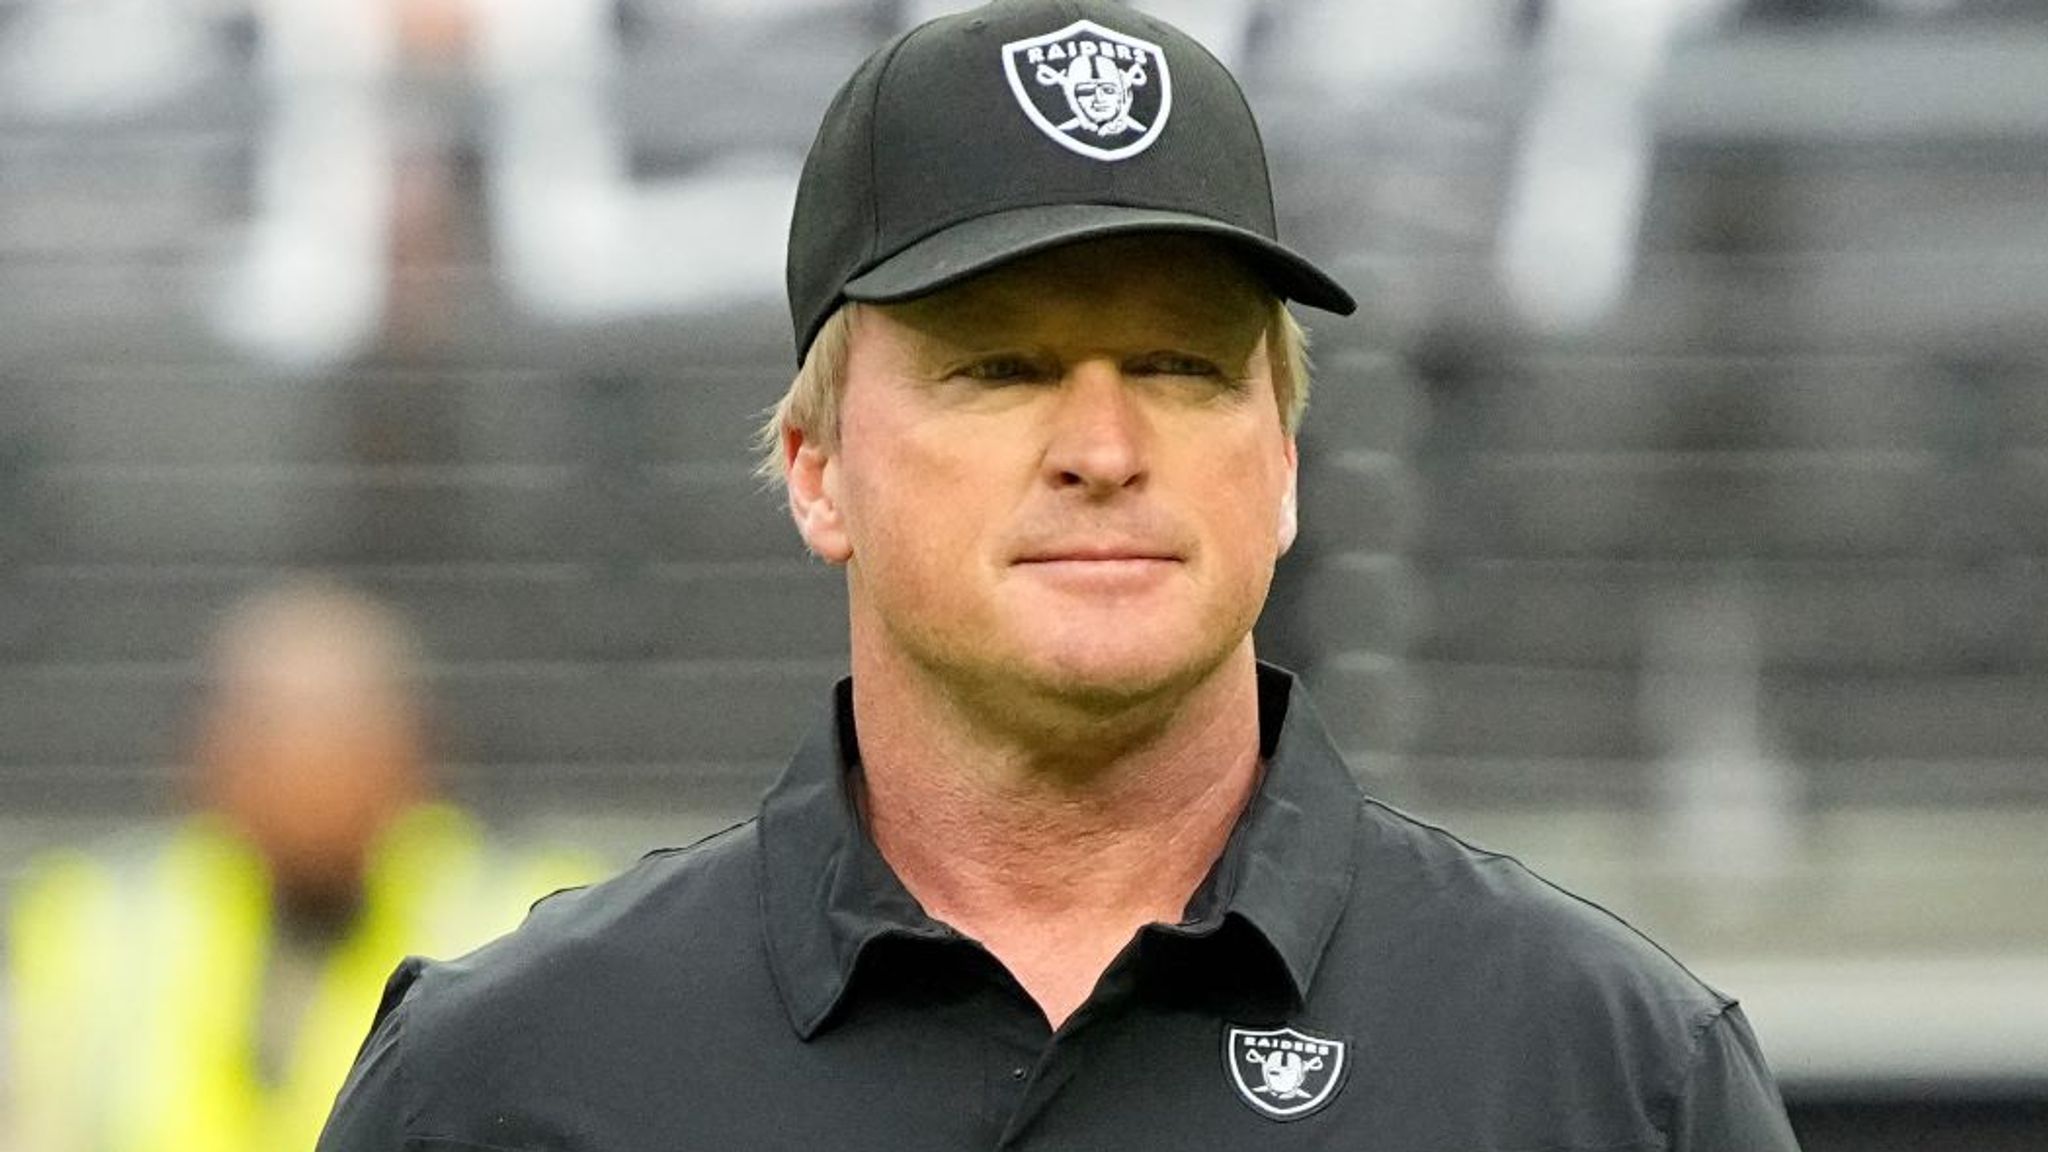 Jon Gruden 2021 - Net Worth, Salary, Records, Personal Life and More